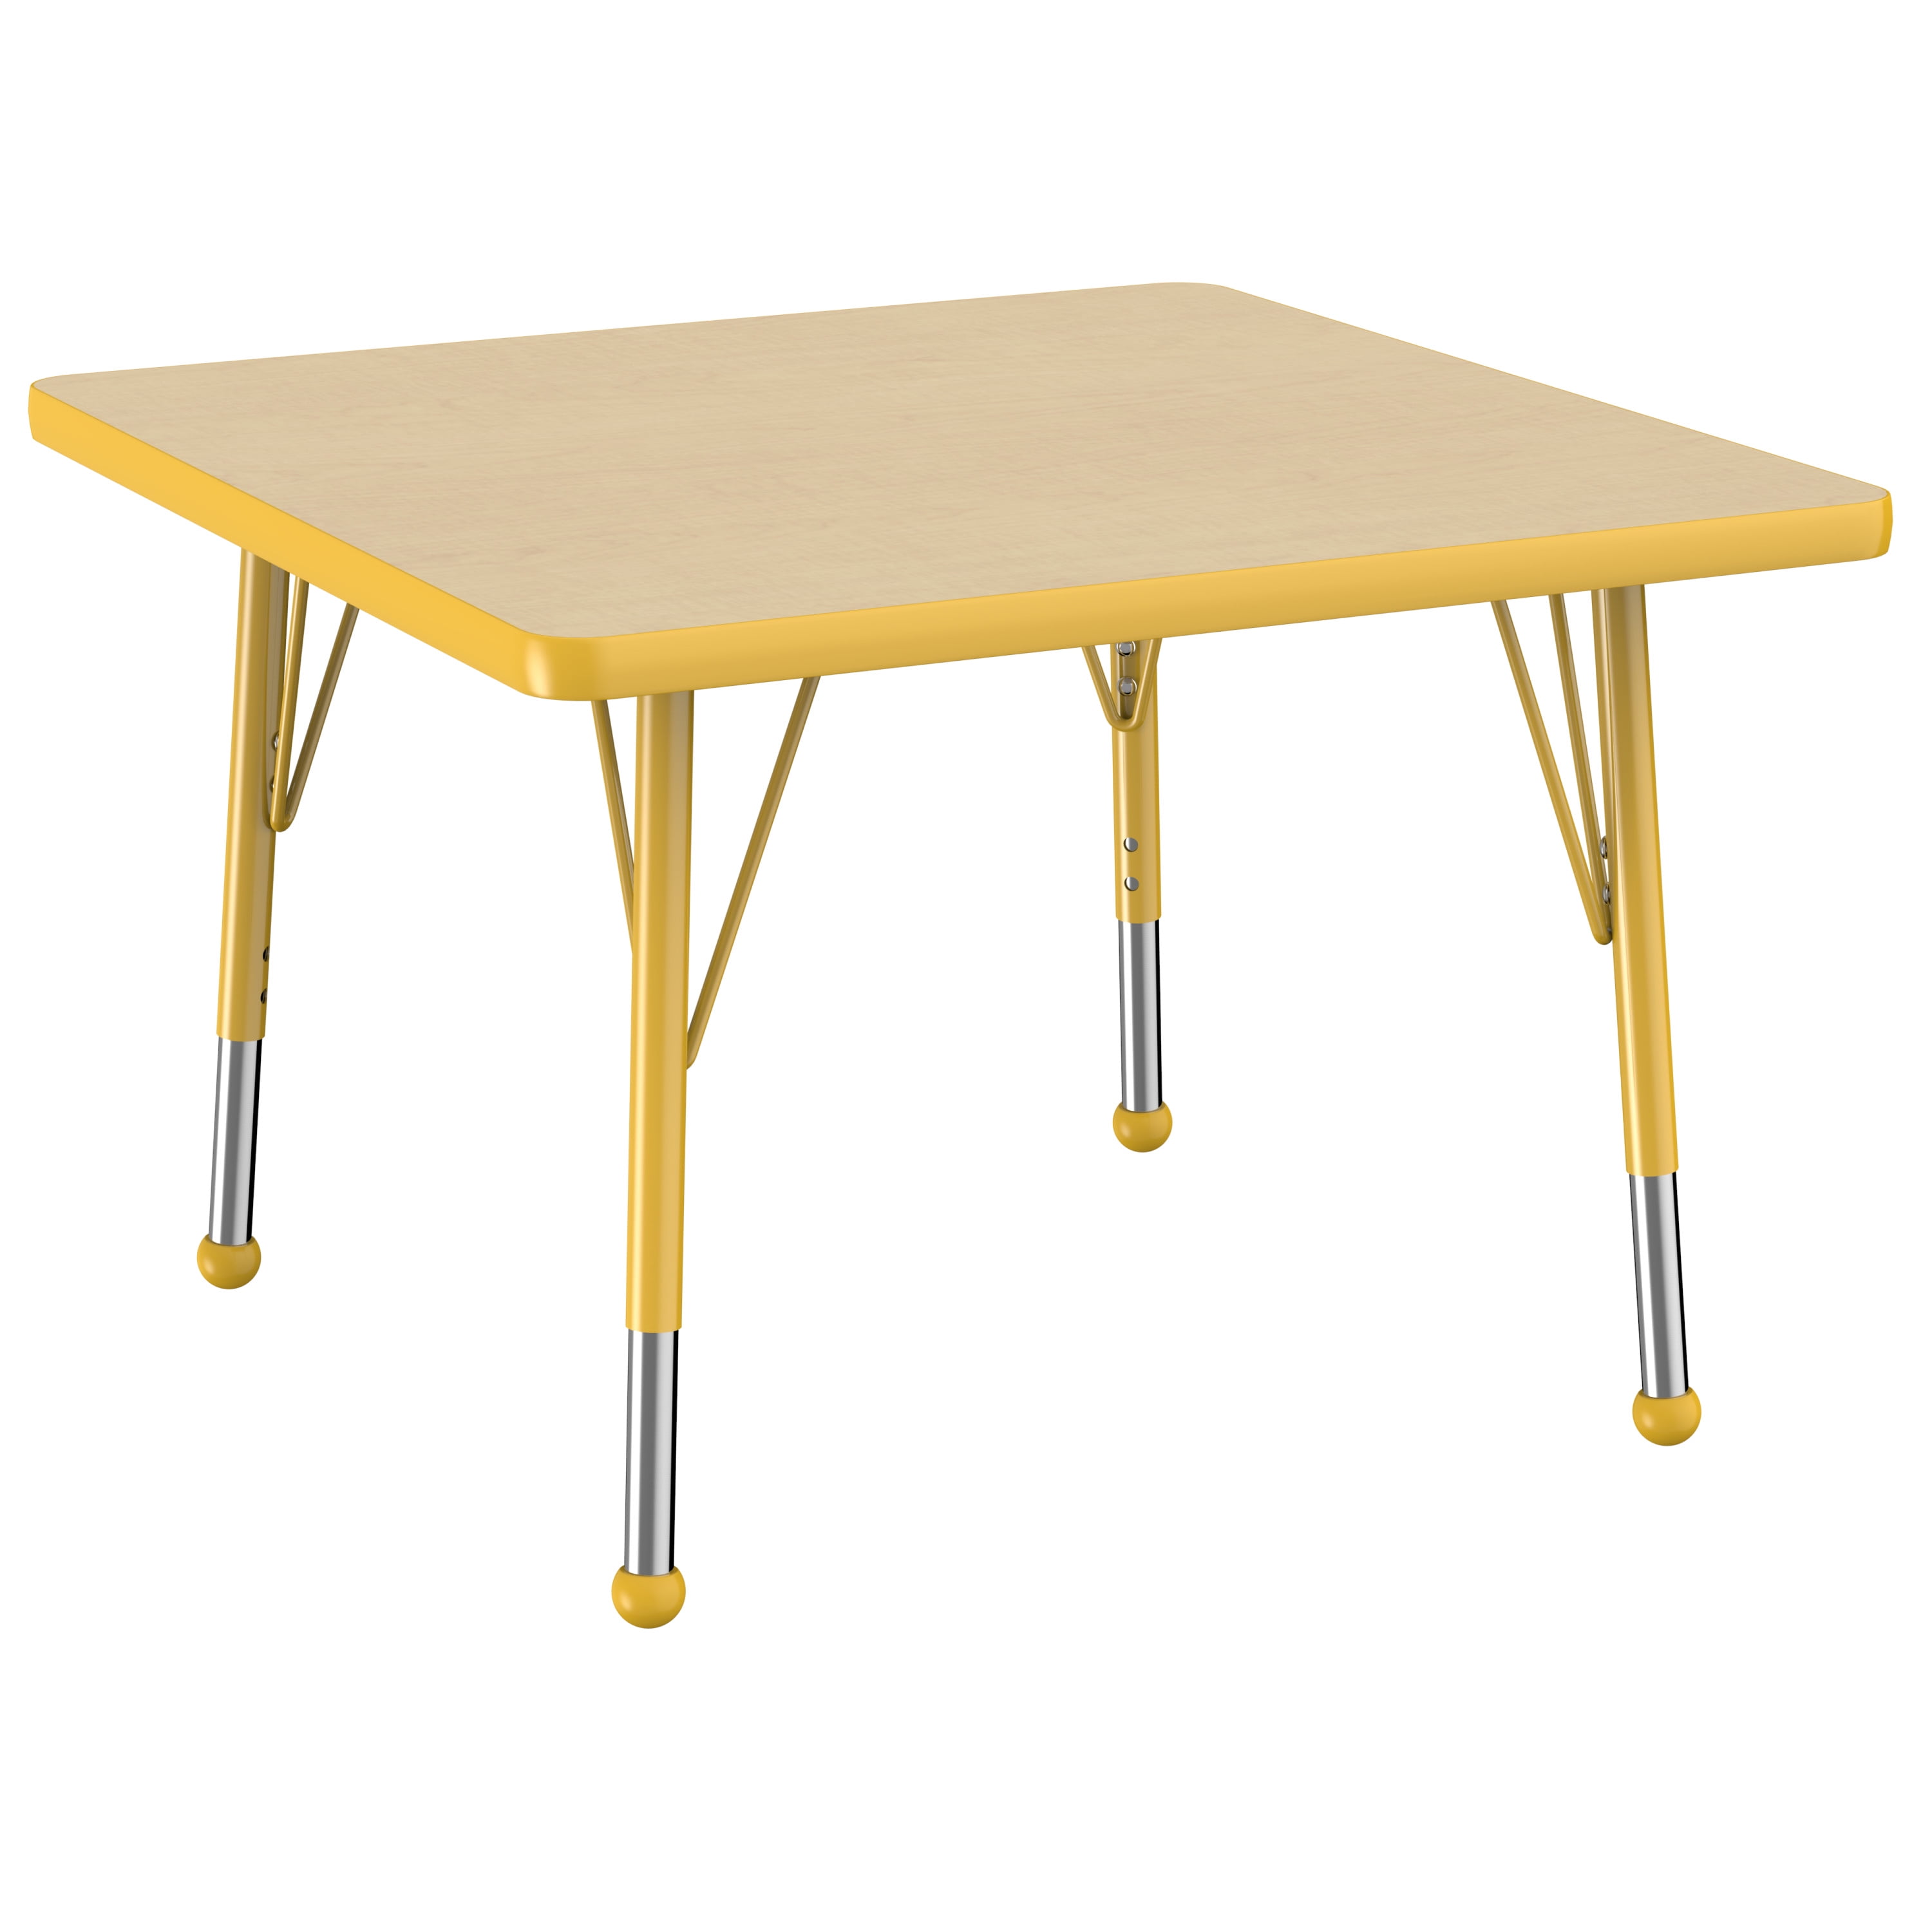 Maple/Blue/Sand Adjustable Height 15-23 inch Toddler Legs w/ Ball Glides ECR4Kids Mesa Everyday 24 x 48 Trapezoid School Activity Table